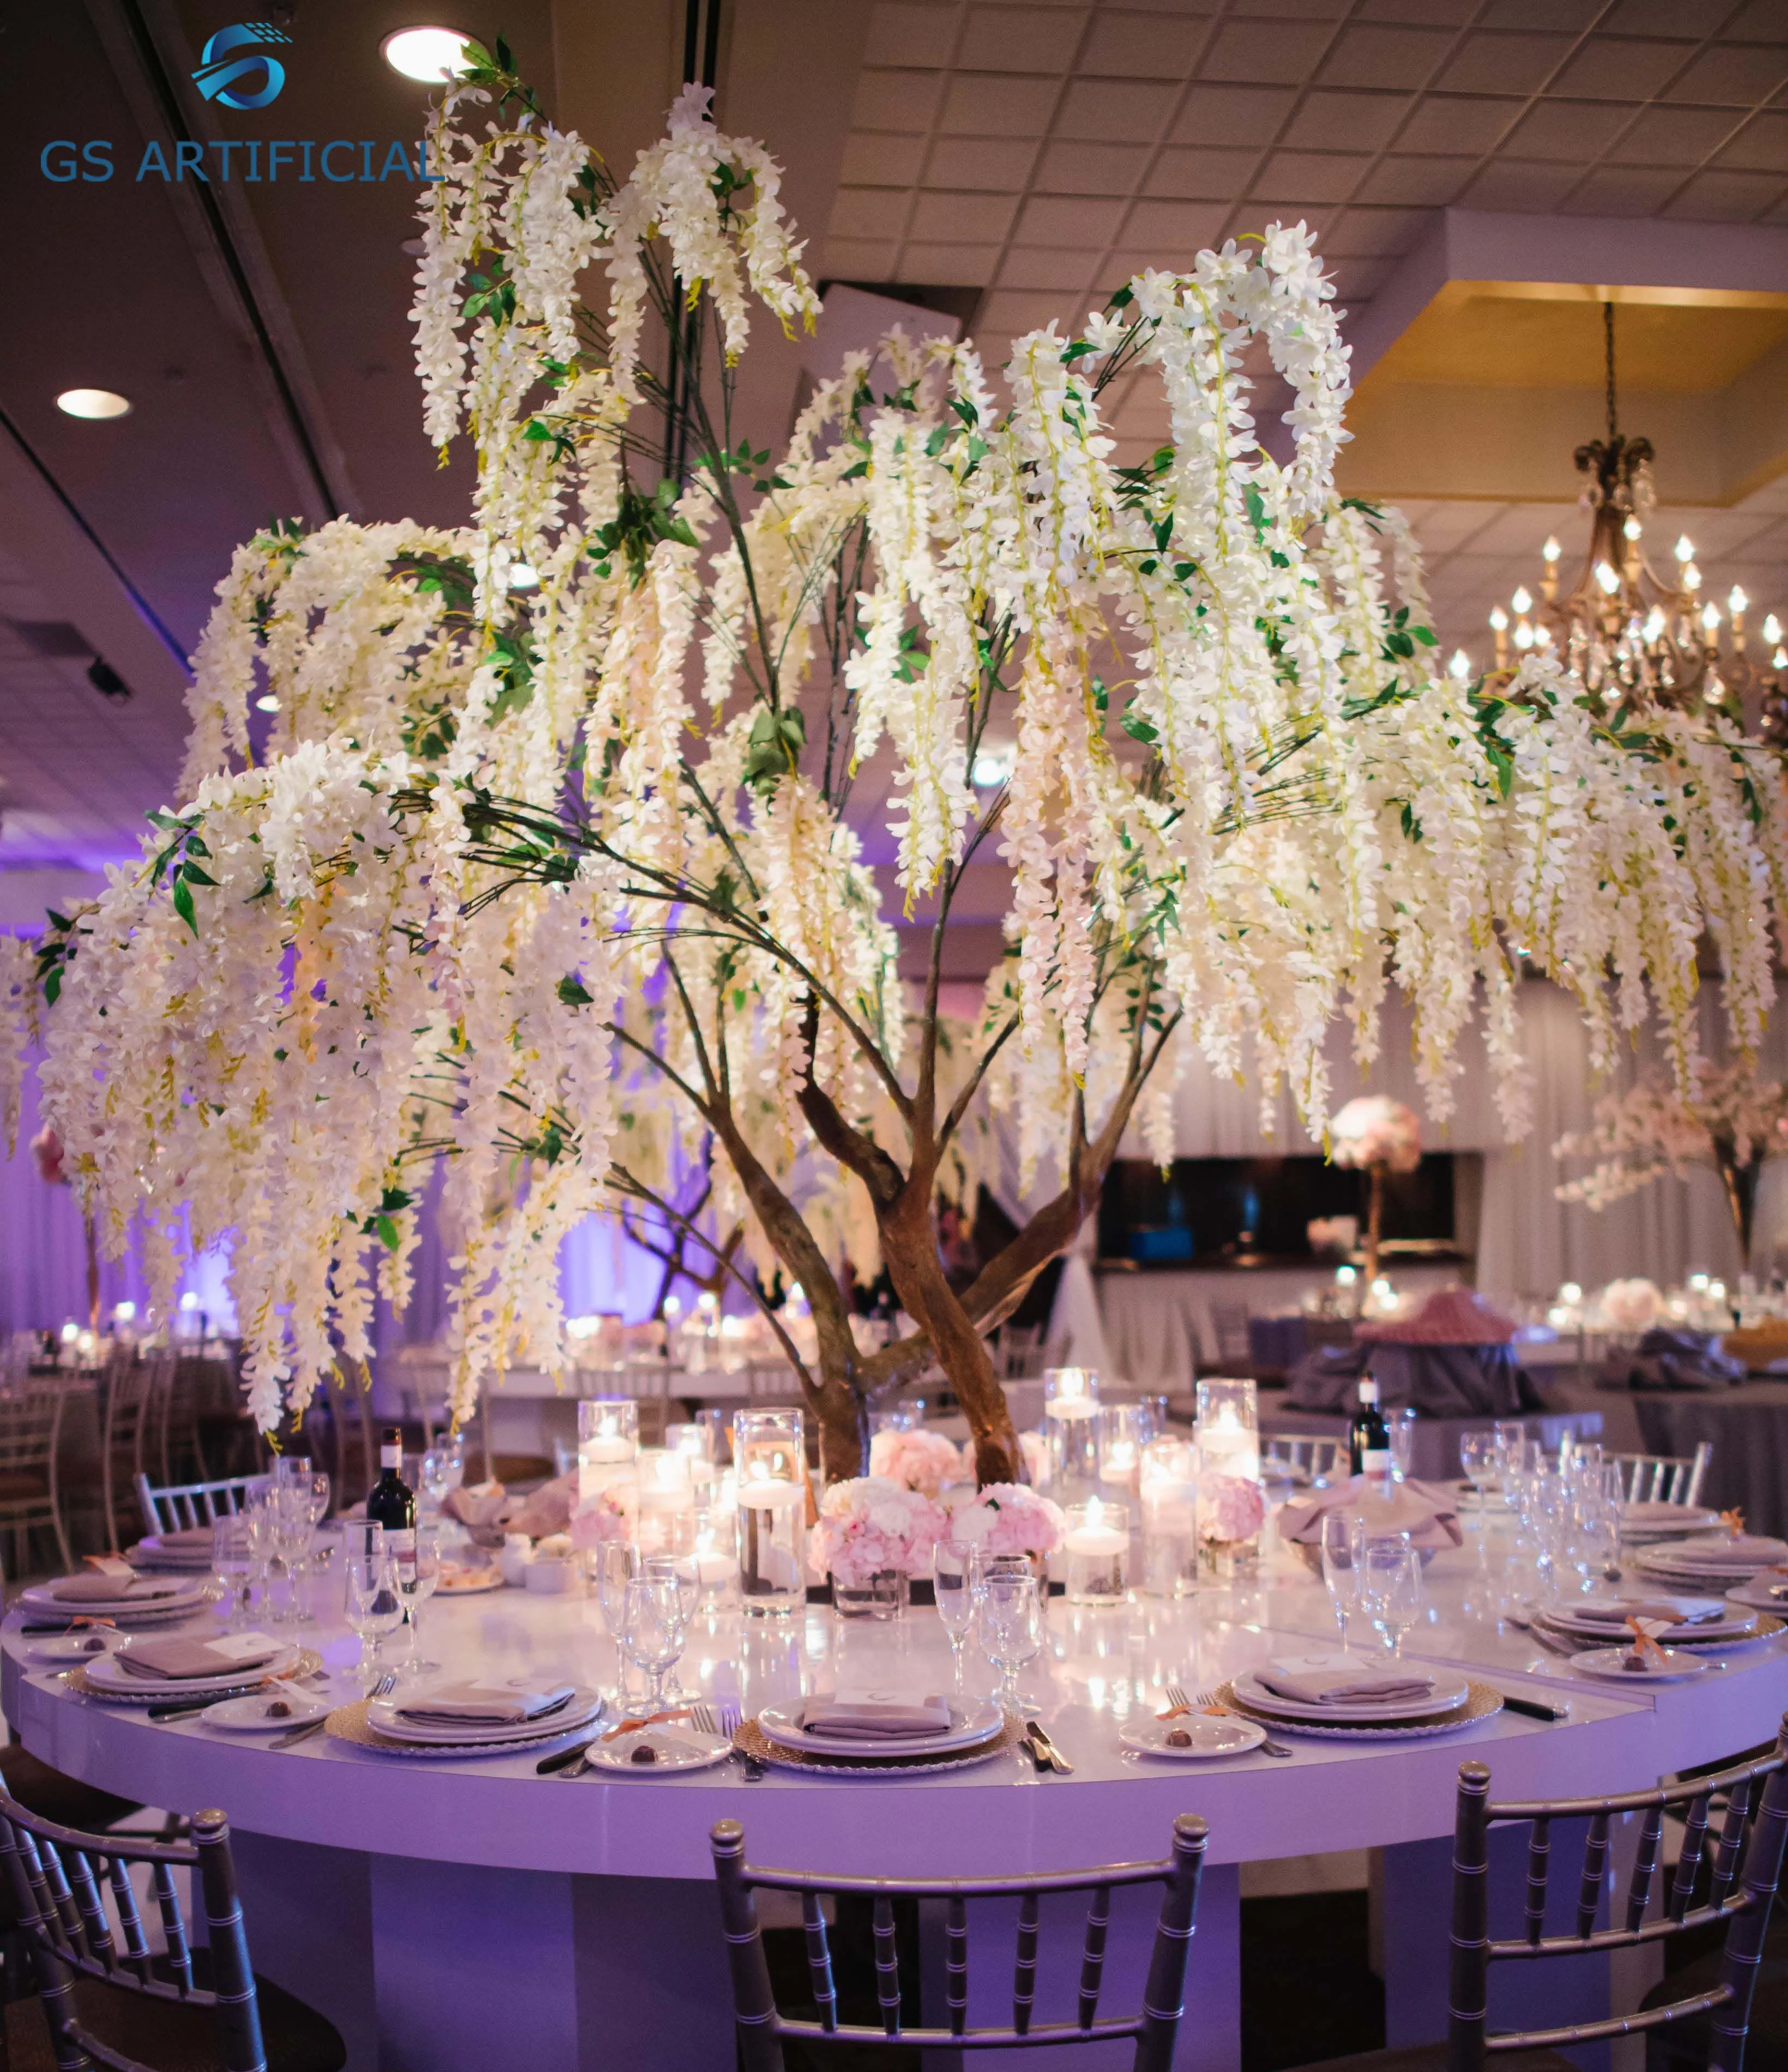 Fake Tree 150cm Tall Wisteria Wedding Plant Draping White Flowers Artificial Flower Tree Buy Artificial Flowers Wedding Wisteria Fake Tree Fake Flower Product On Alibaba Com